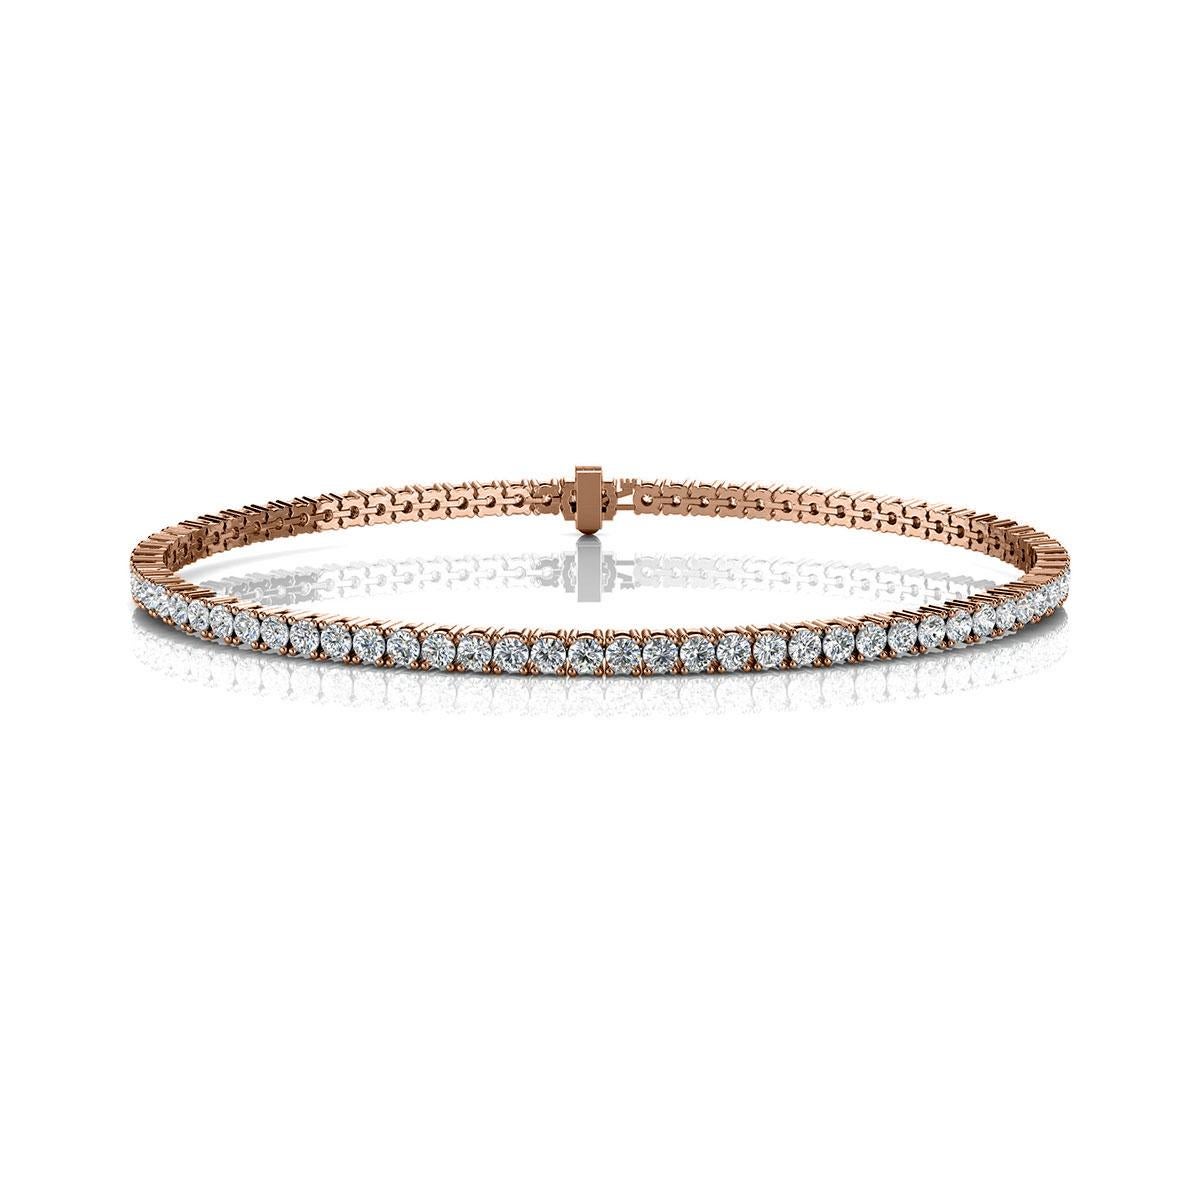 A timeless four prongs diamonds tennis bracelet. Experience the Difference!

Product details: 

Center Gemstone Type: NATURAL DIAMOND
Center Gemstone Color: WHITE
Center Gemstone Shape: ROUND
Center Diamond Carat Weight: 3
Metal: 18K Rose Gold
Metal